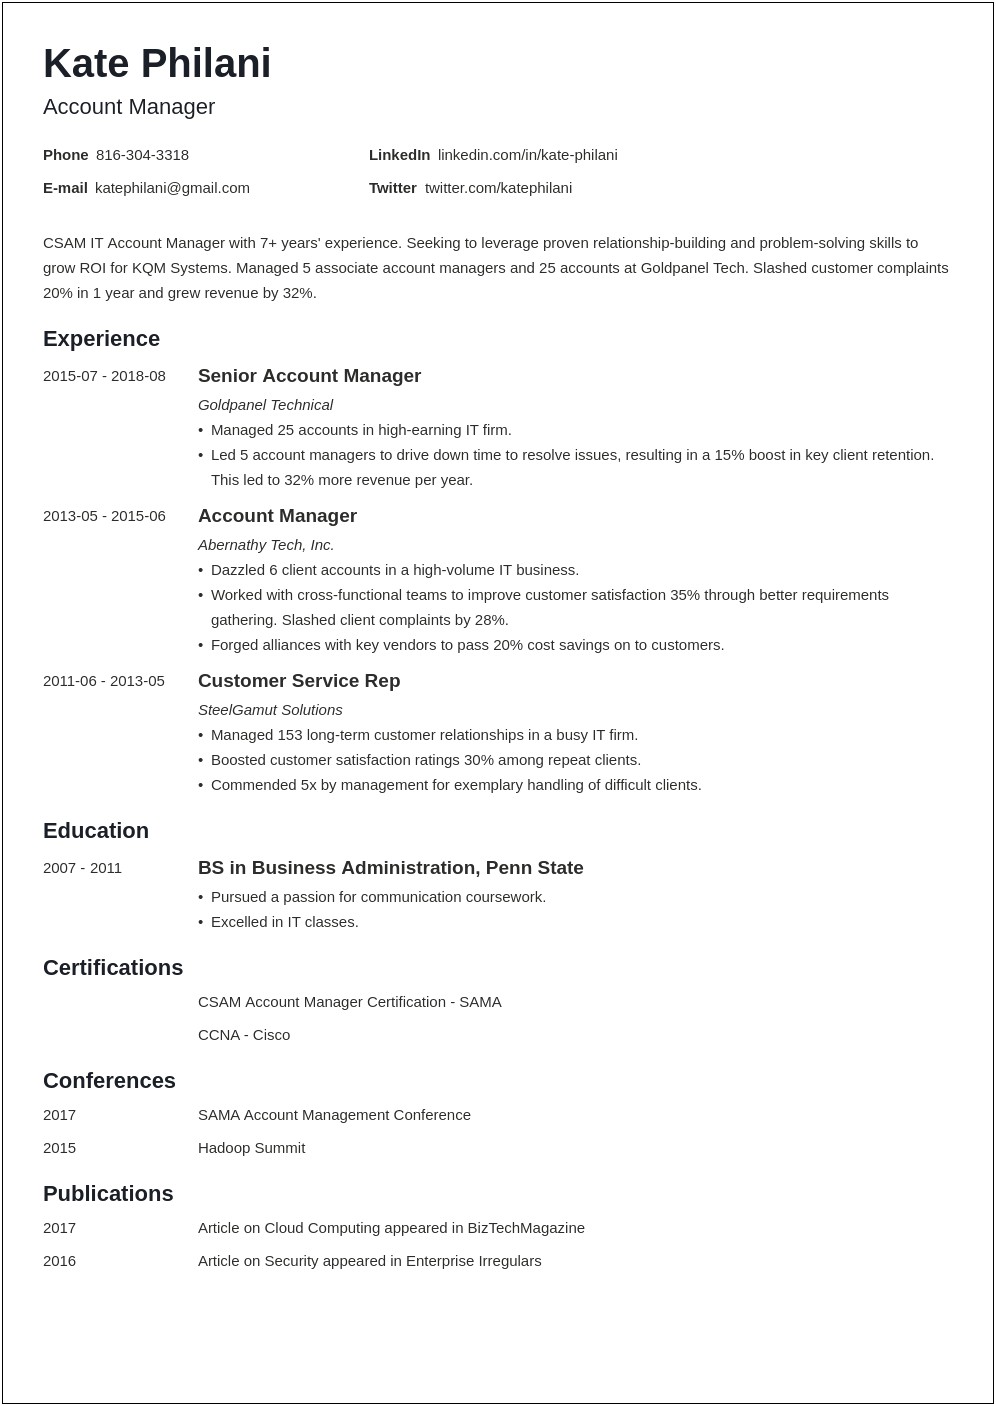 Resume Objective For Key Account Manager